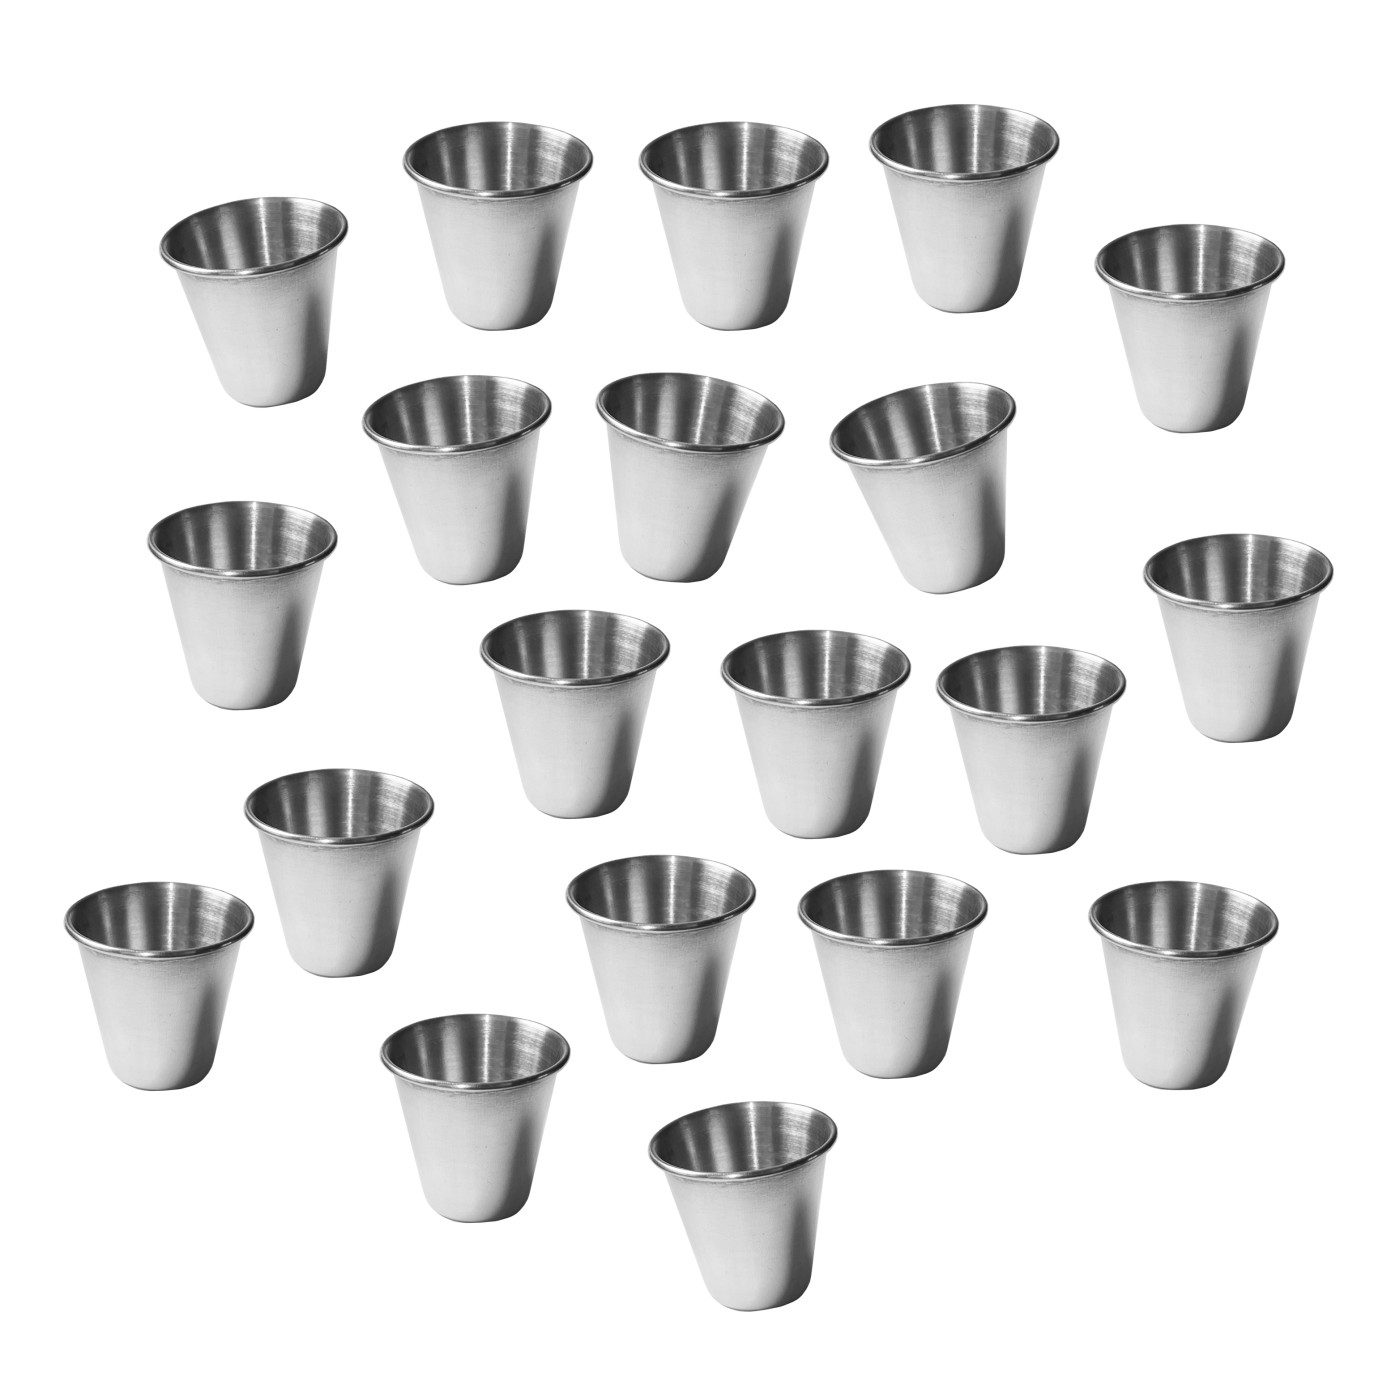 https://www.woodtoolsanddeco.com/11370-large_default/set-of-20-stainless-steel-cups-30-ml-with-rolled-edges.jpg